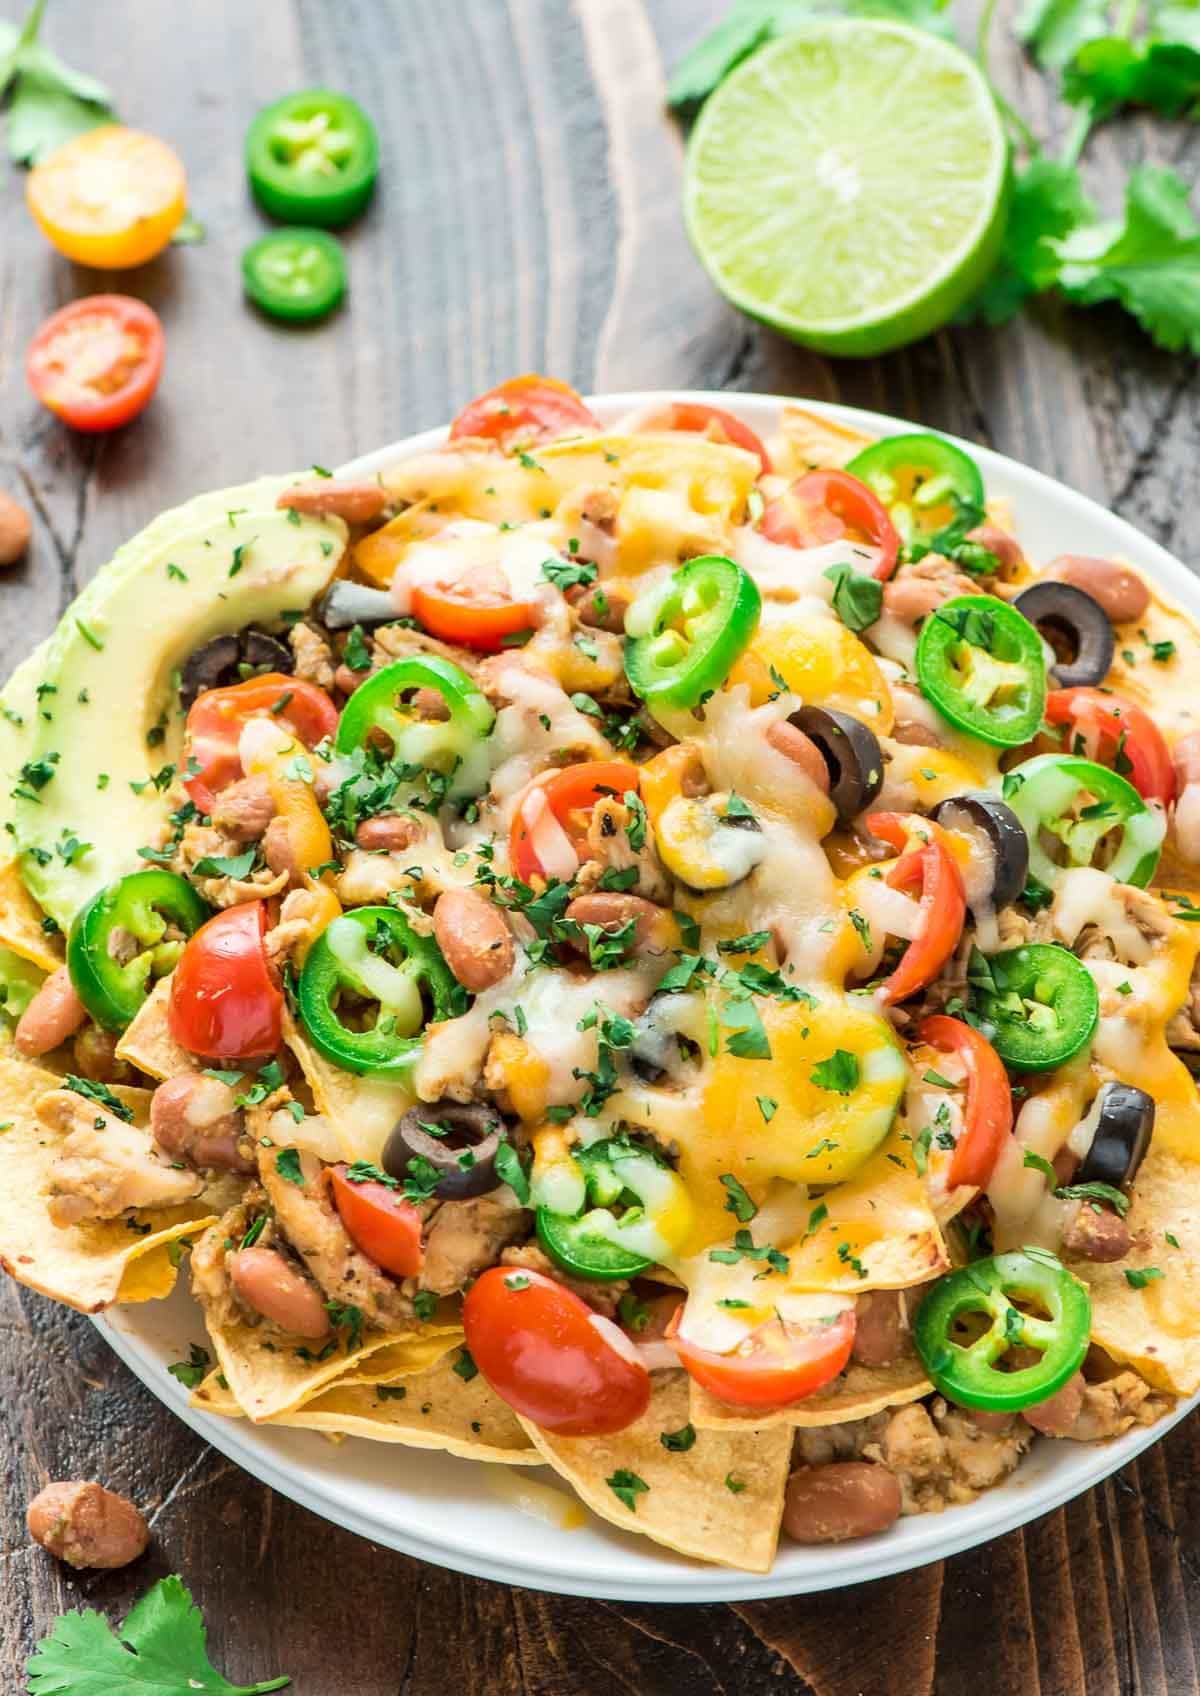 Clean Eating Made Simple » Chicken Nachos ~ Slow Cooker Recipe!